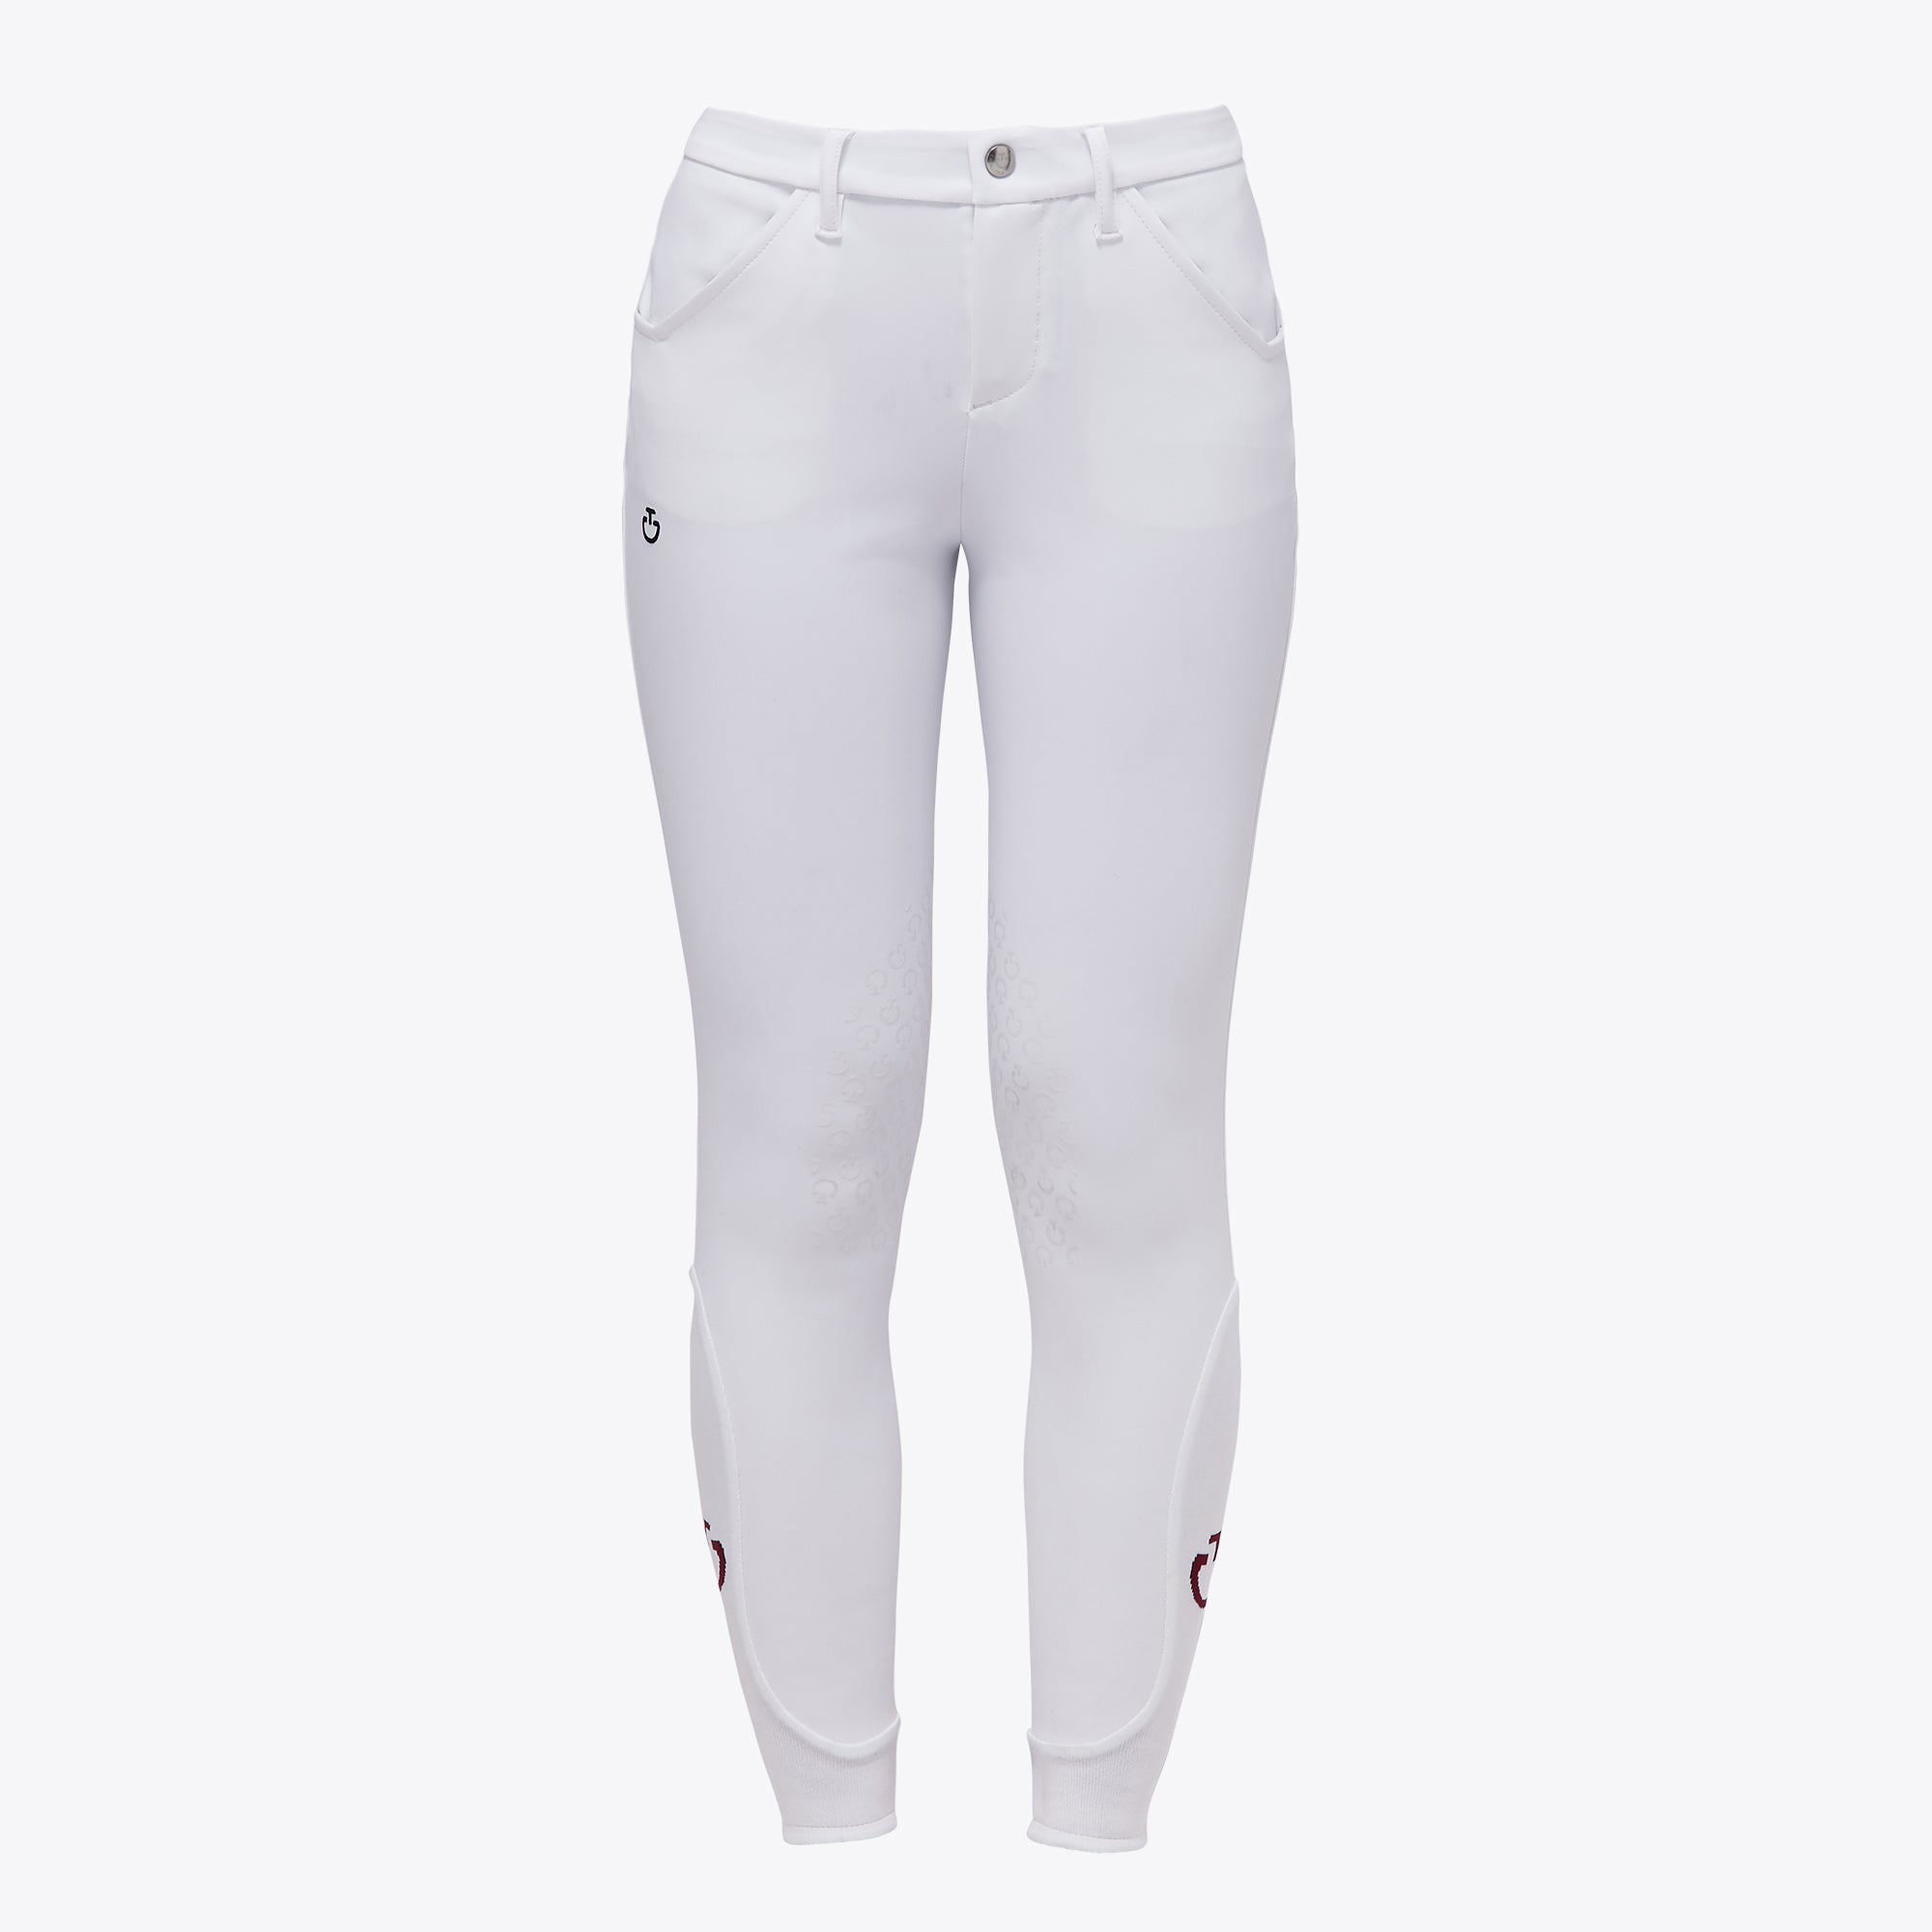 Young Riders CT Unisex Riding Breeches - White